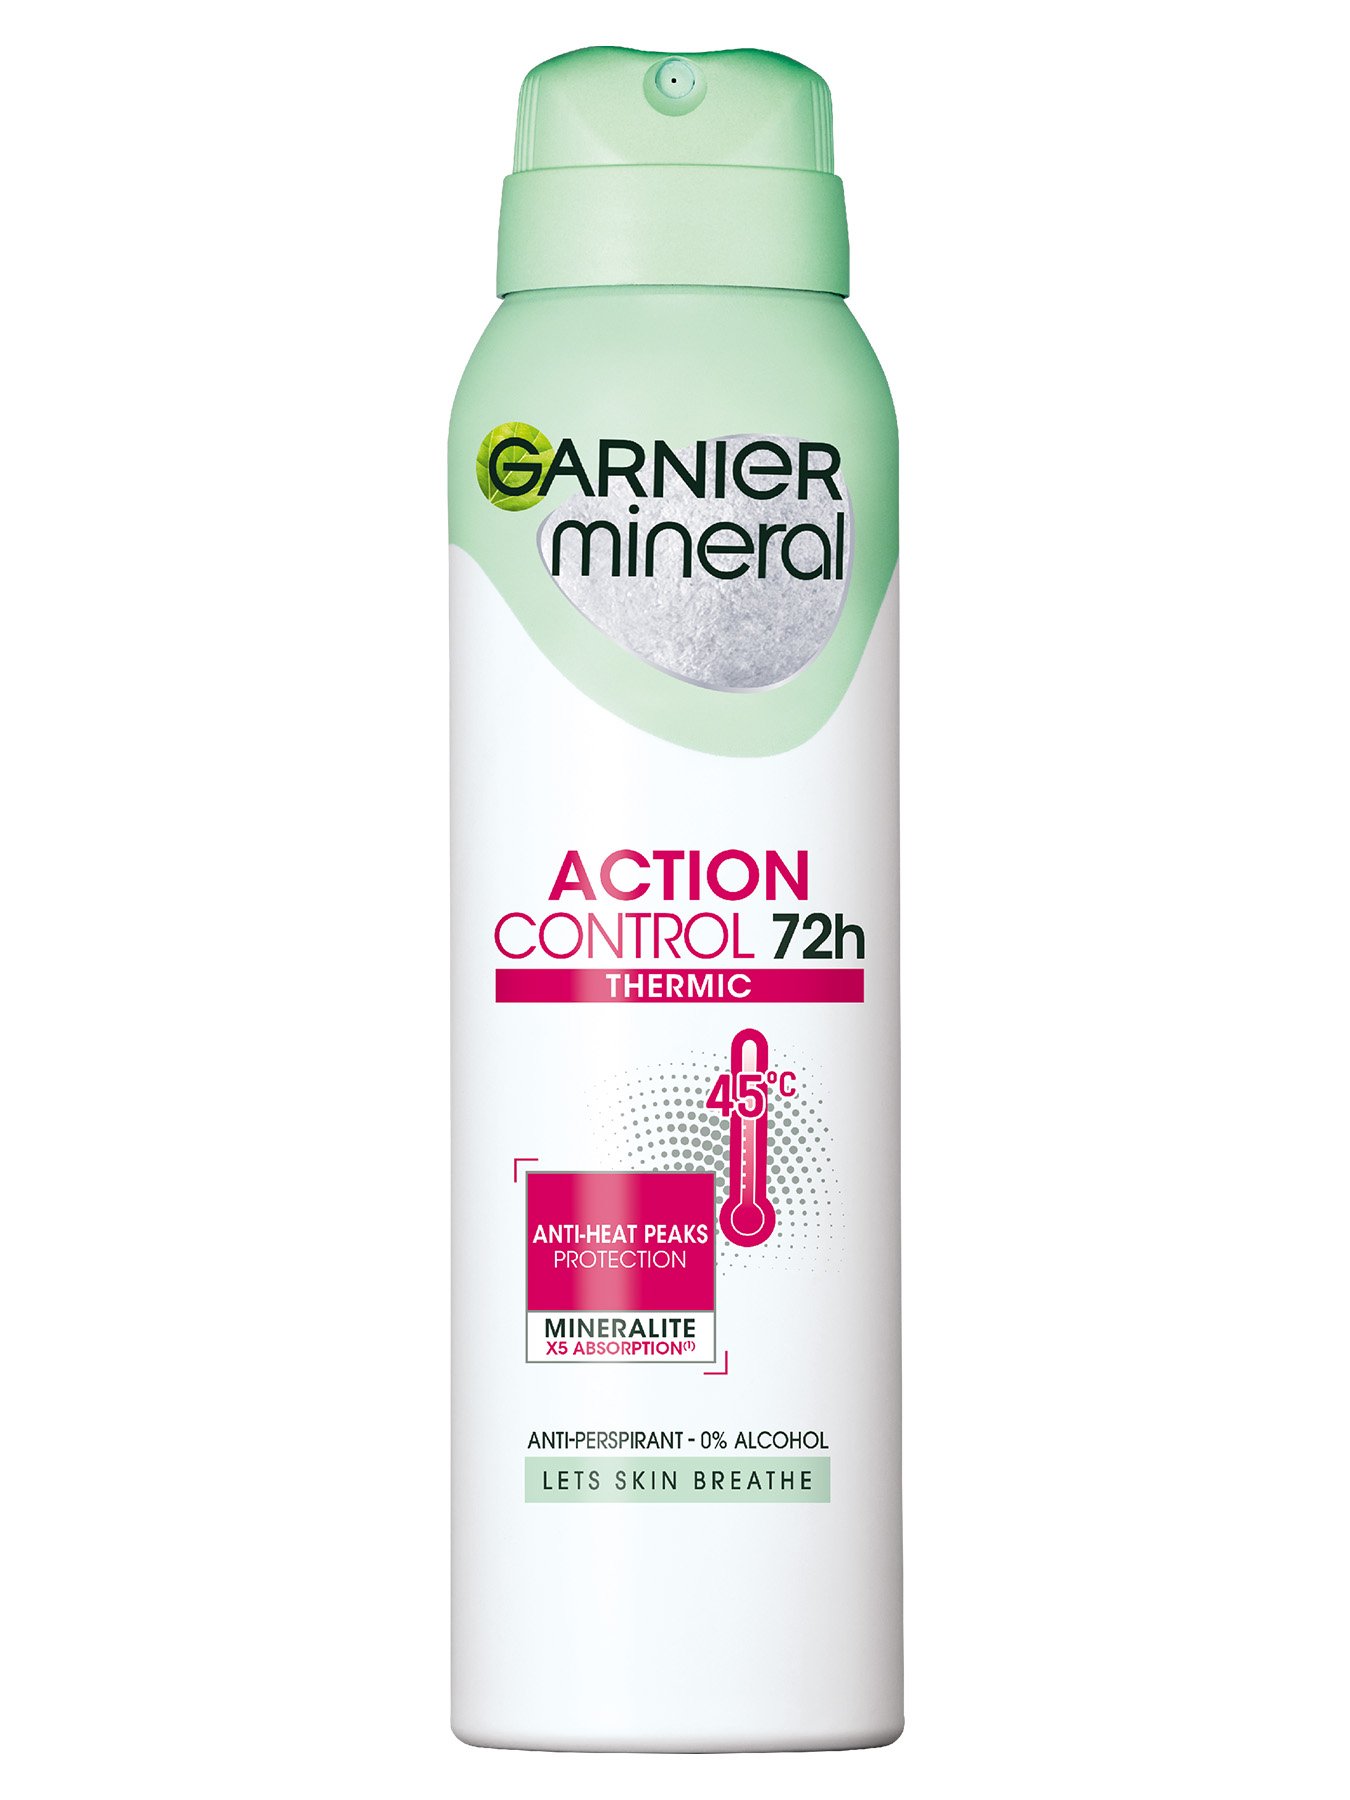 Garnier Mineral Deo Action Control Thermic 72h Sprej